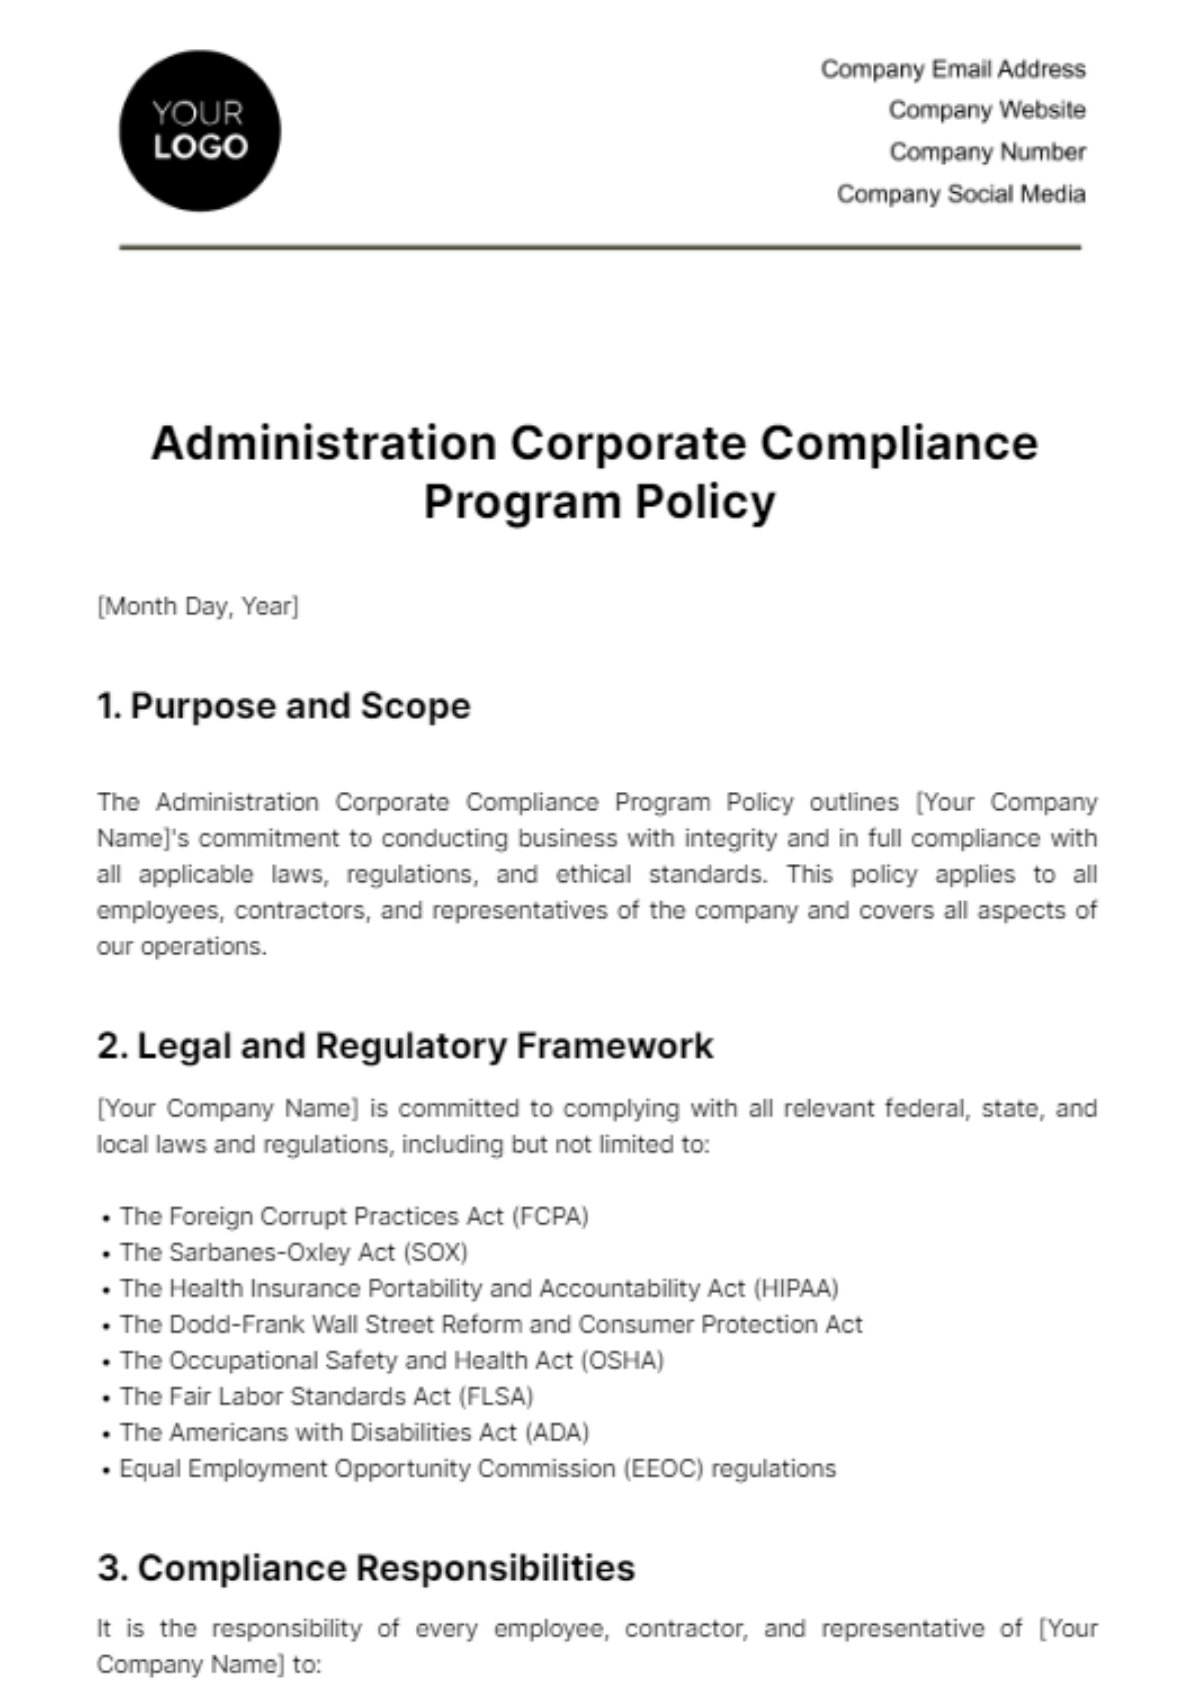 Free Administration Corporate Compliance Program Policy Template